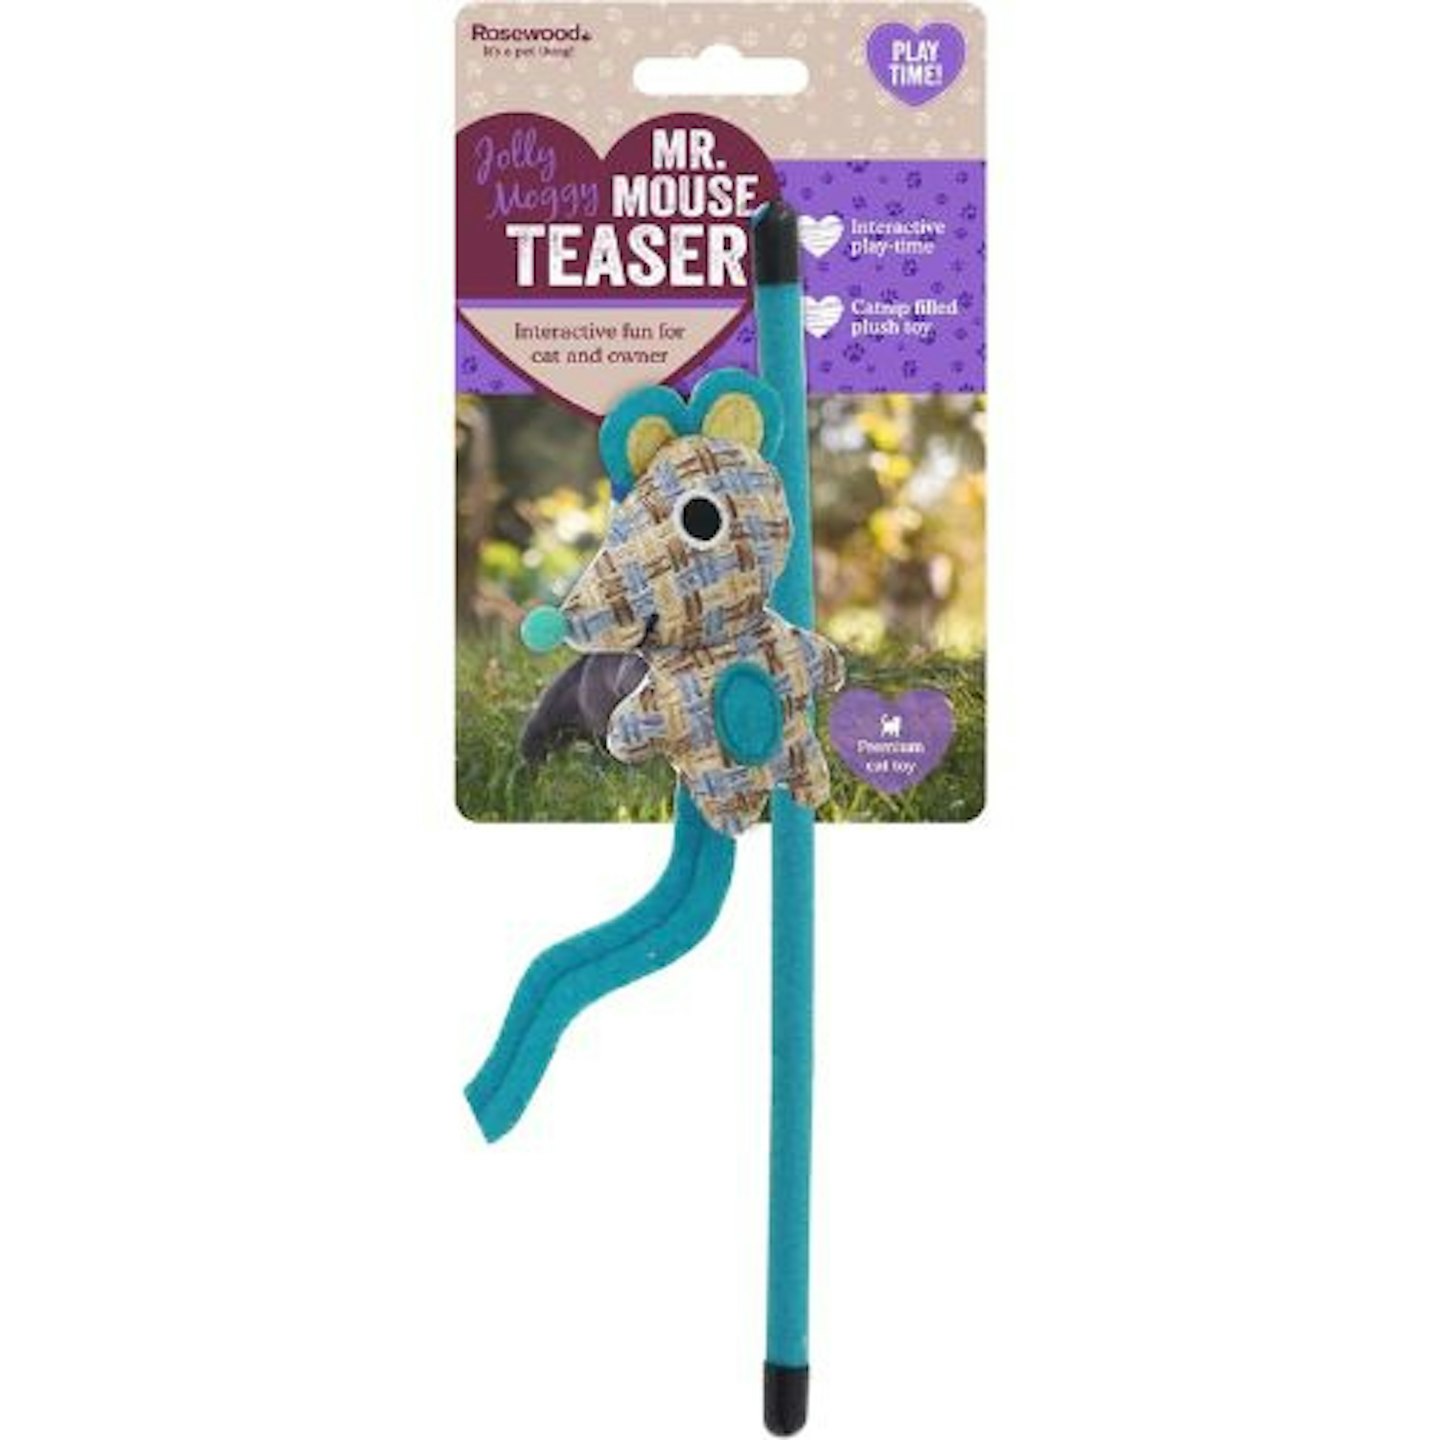 Rosewood Jolly Moggy Mr Mouse Teaser